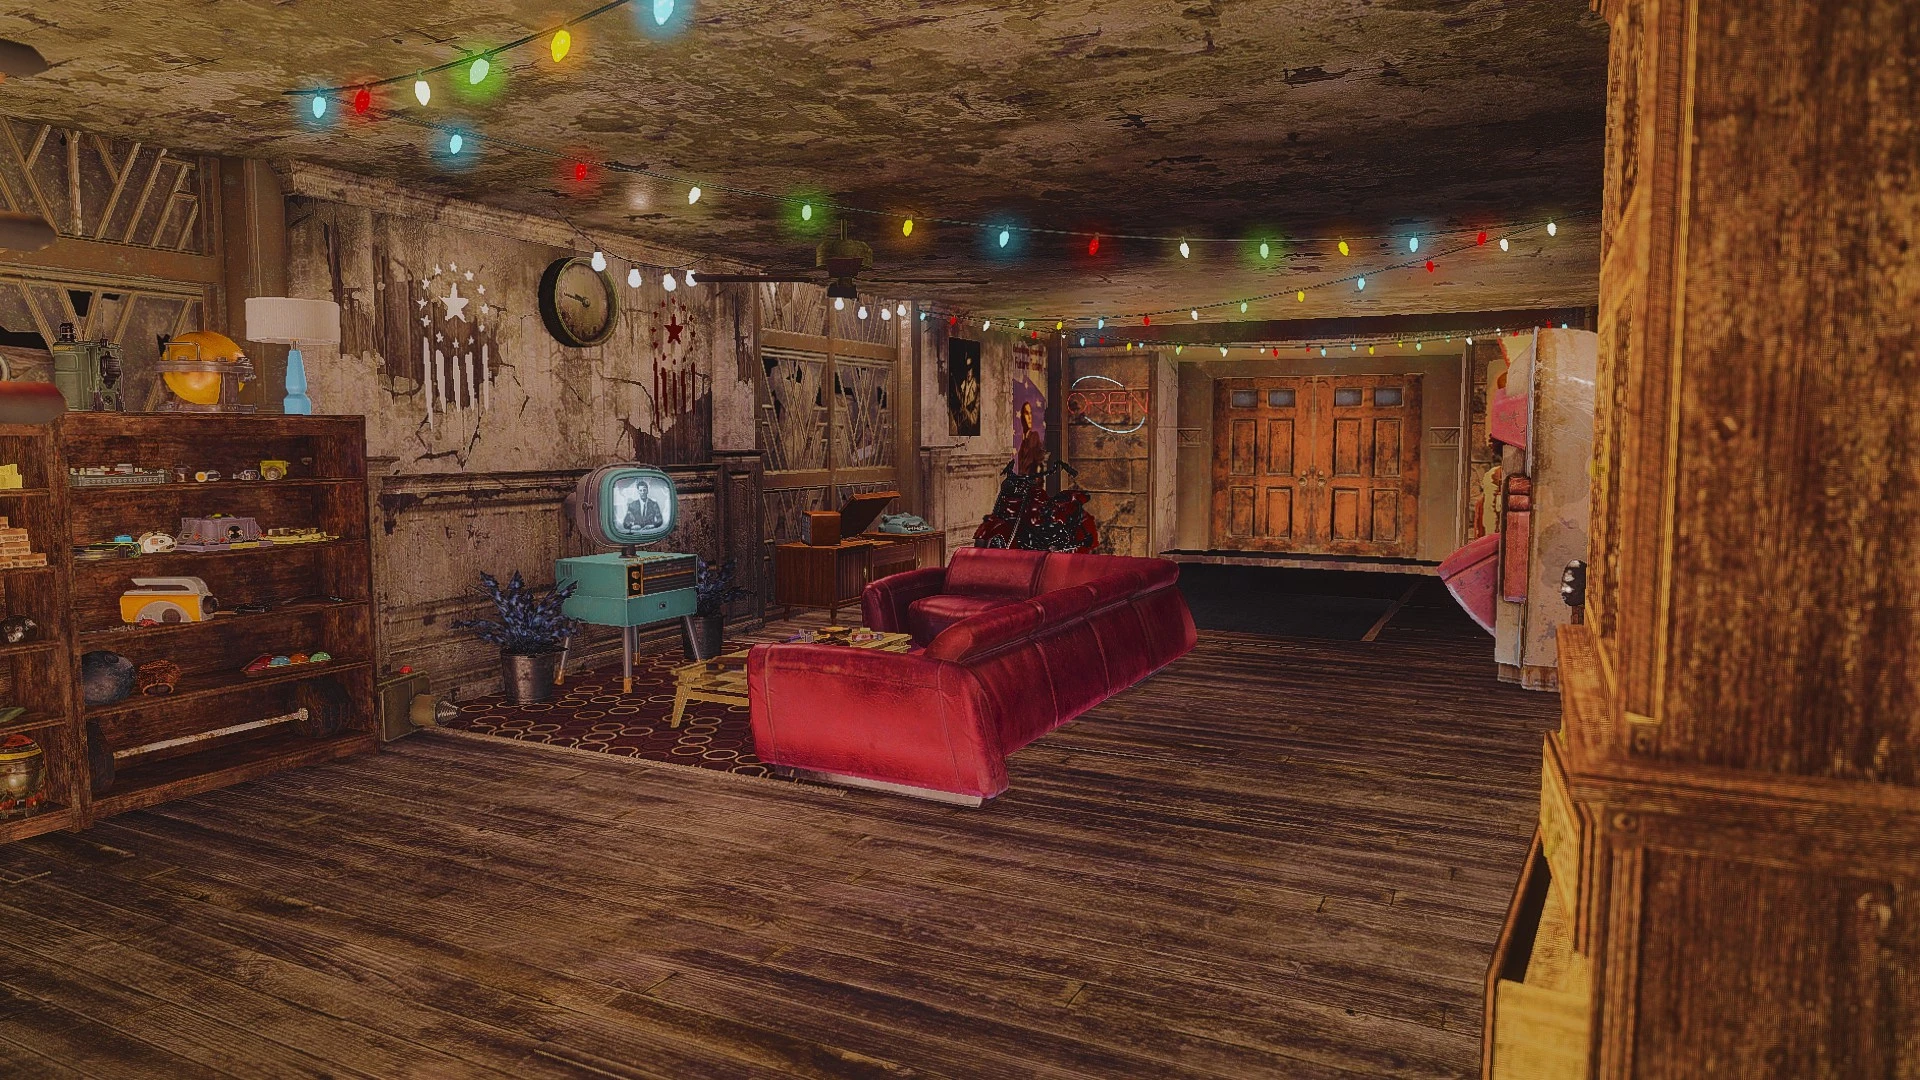 Eternal Night - Goodneighbor Player Home at Fallout 4 Nexus - Mods and  community